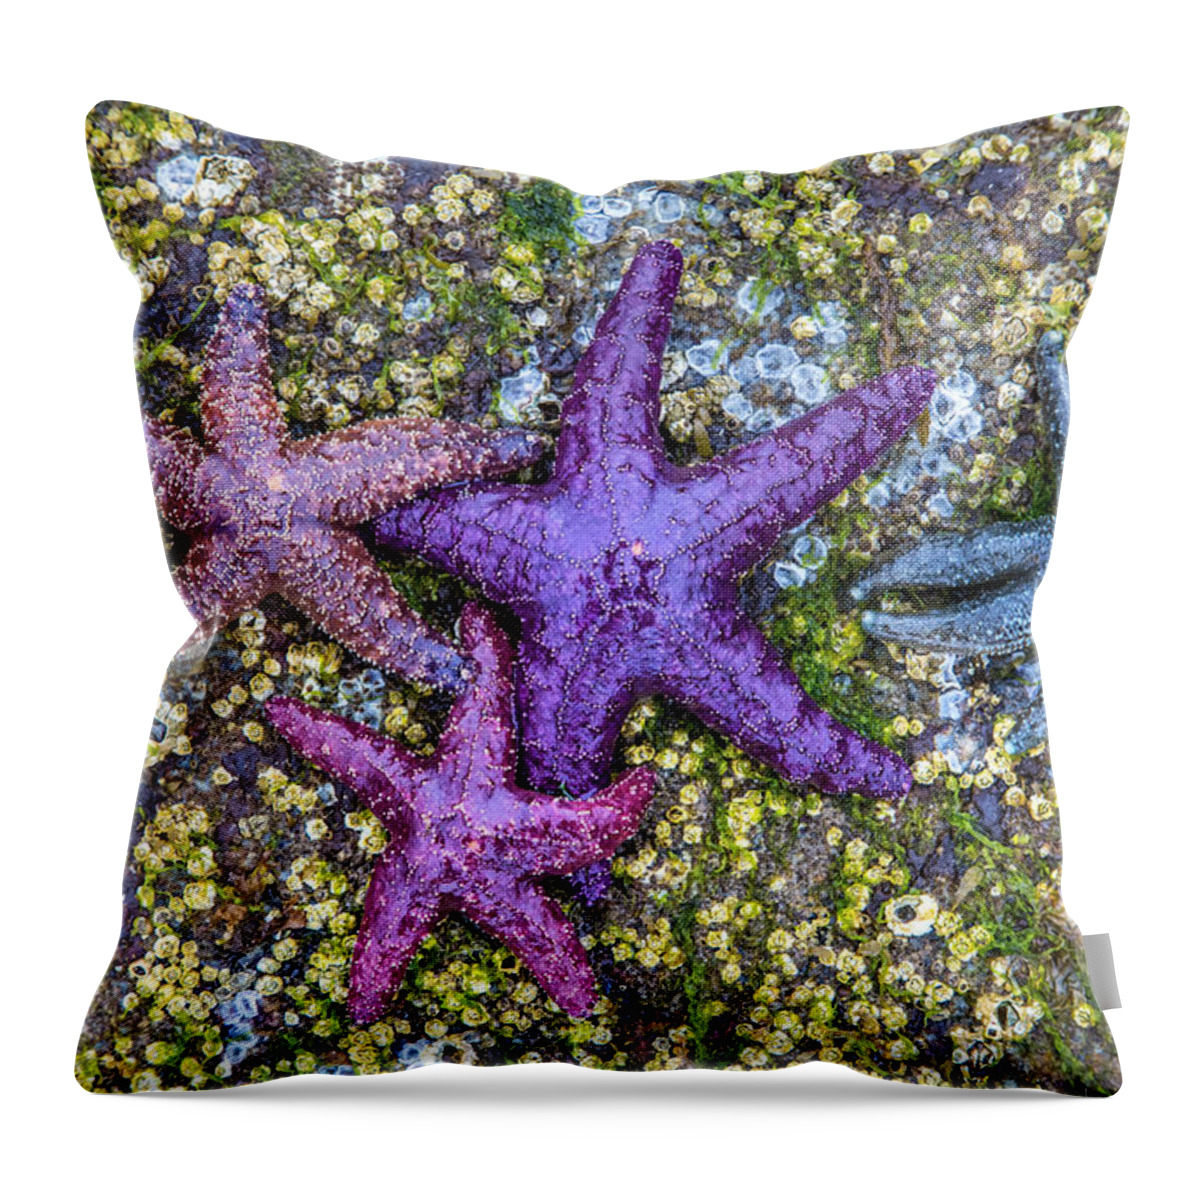 Starfish Throw Pillow featuring the photograph Colorful Starfish BC by Pierre Leclerc Photography